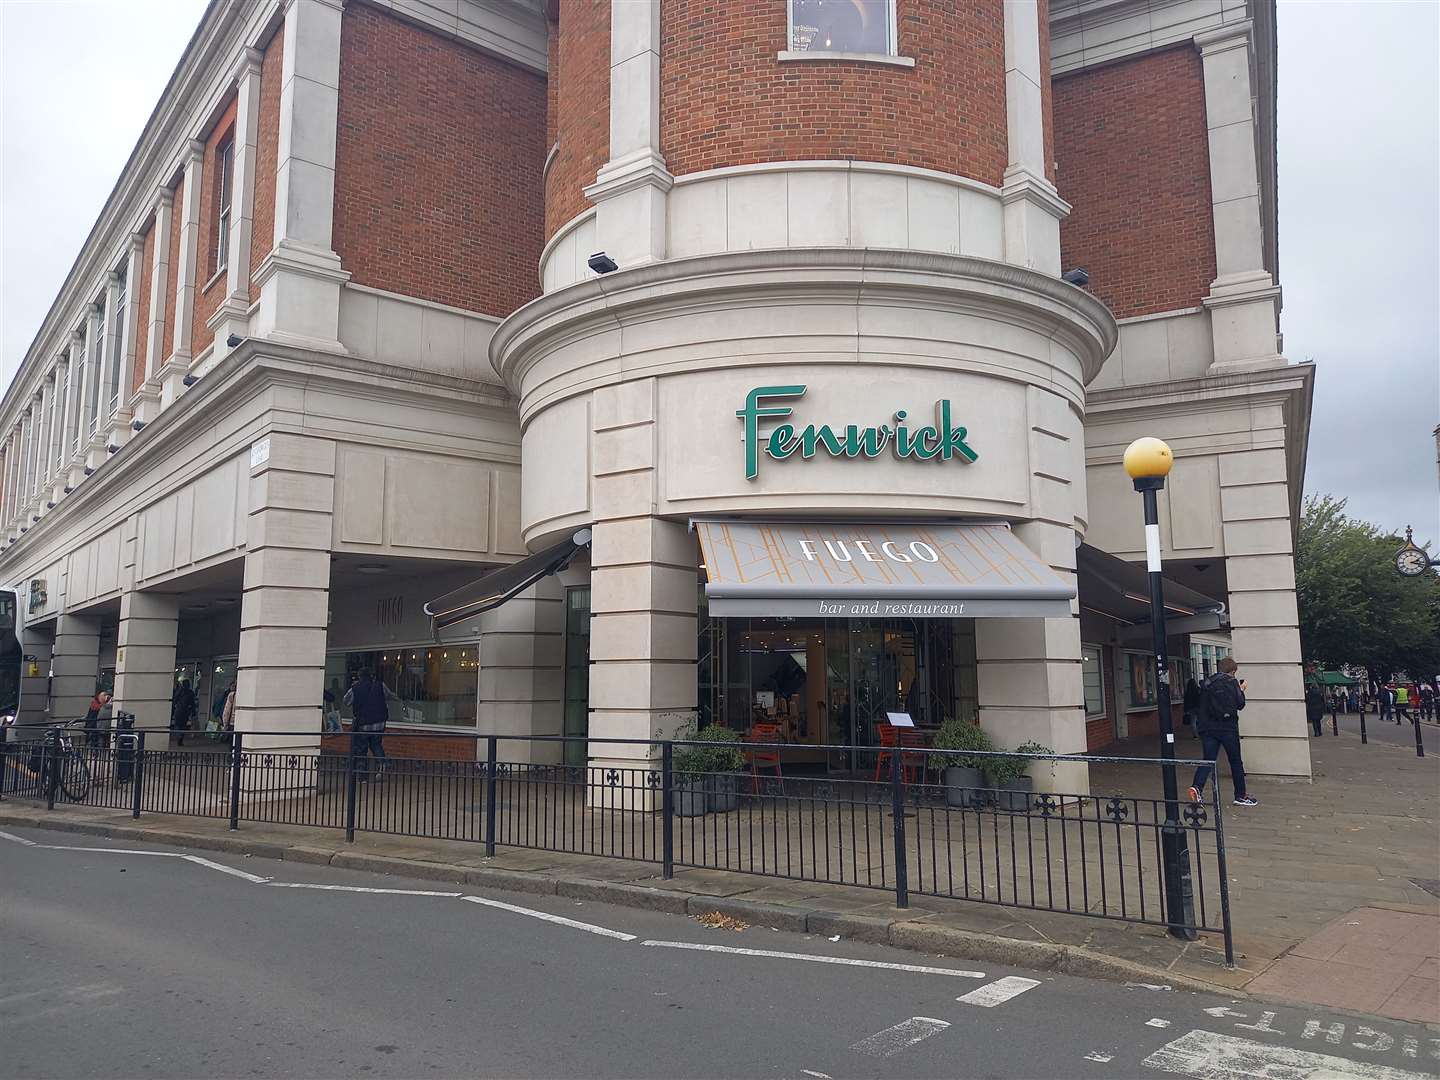 Fuego has taken on the space previously occupied by Carluccio's